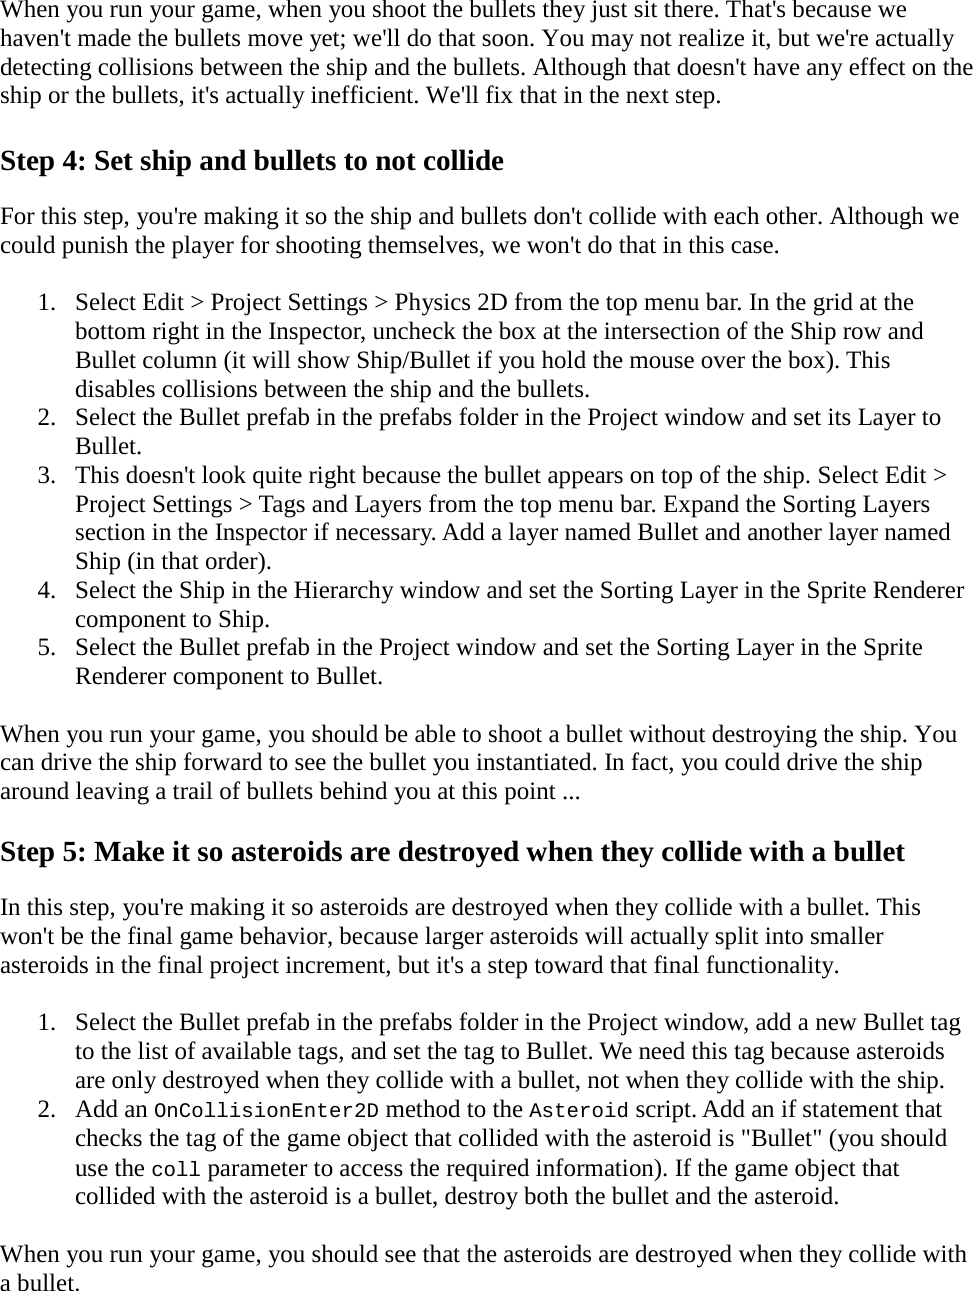 Page 2 of 4 - Chapter 3 Programming Assignment Detailed Instructions